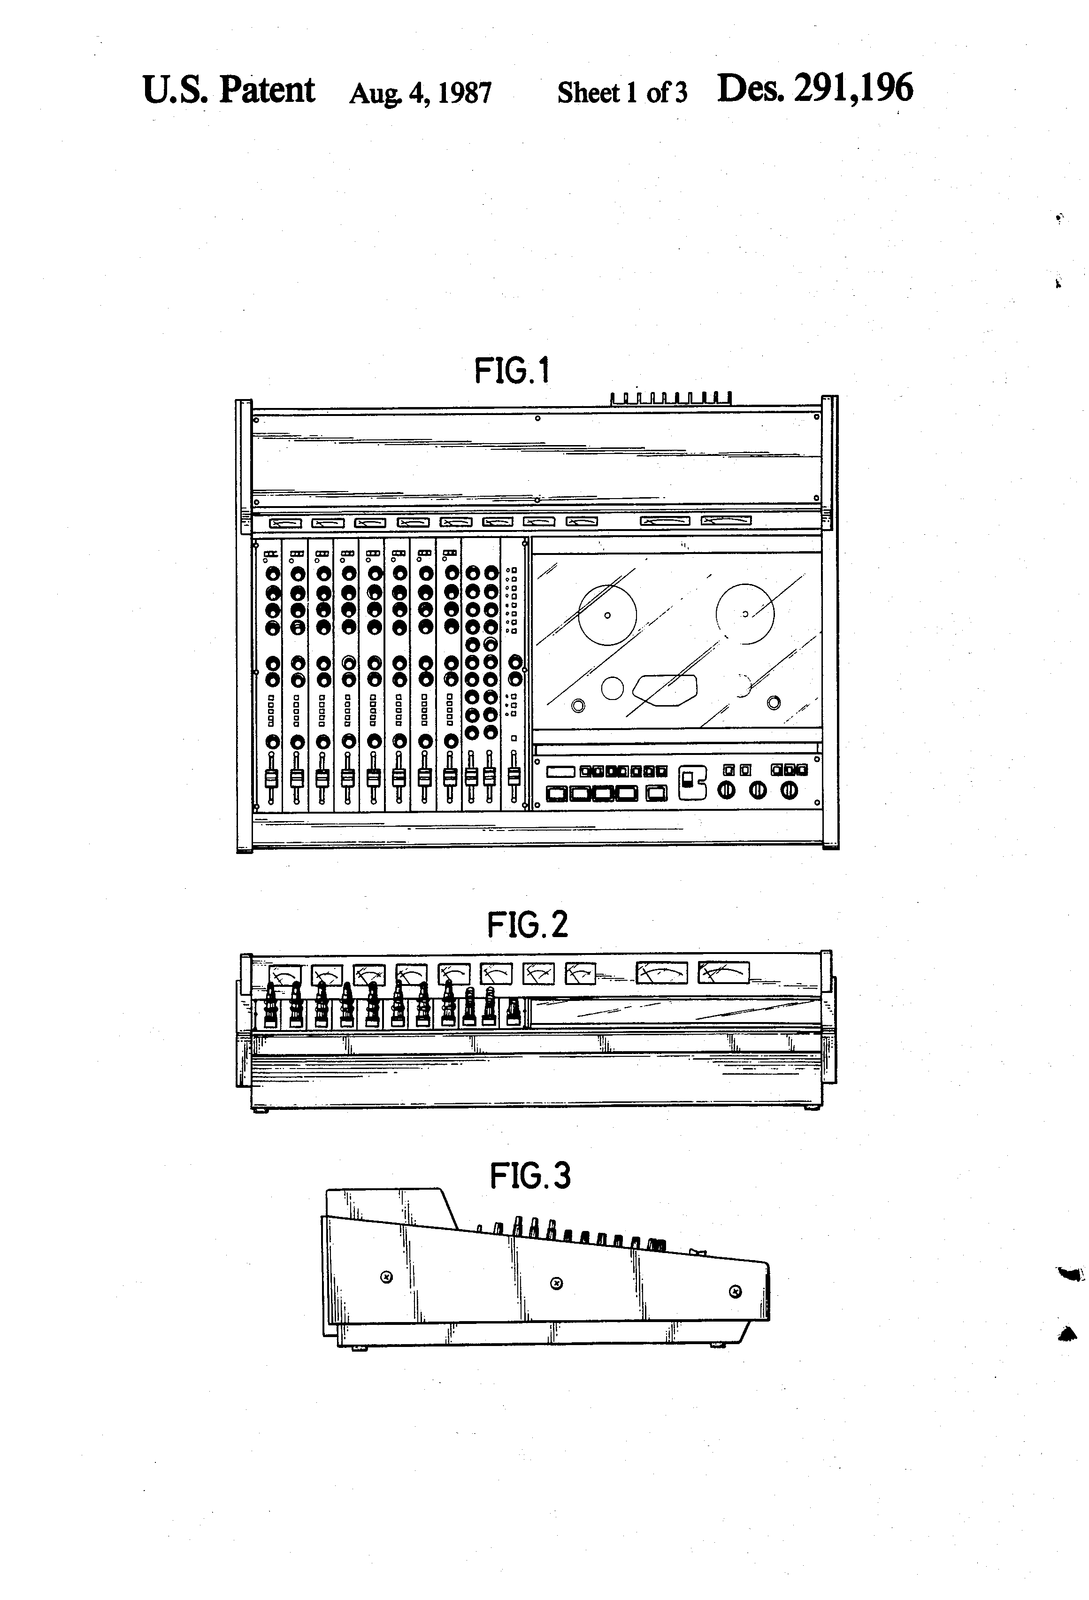 USD291196-1.png